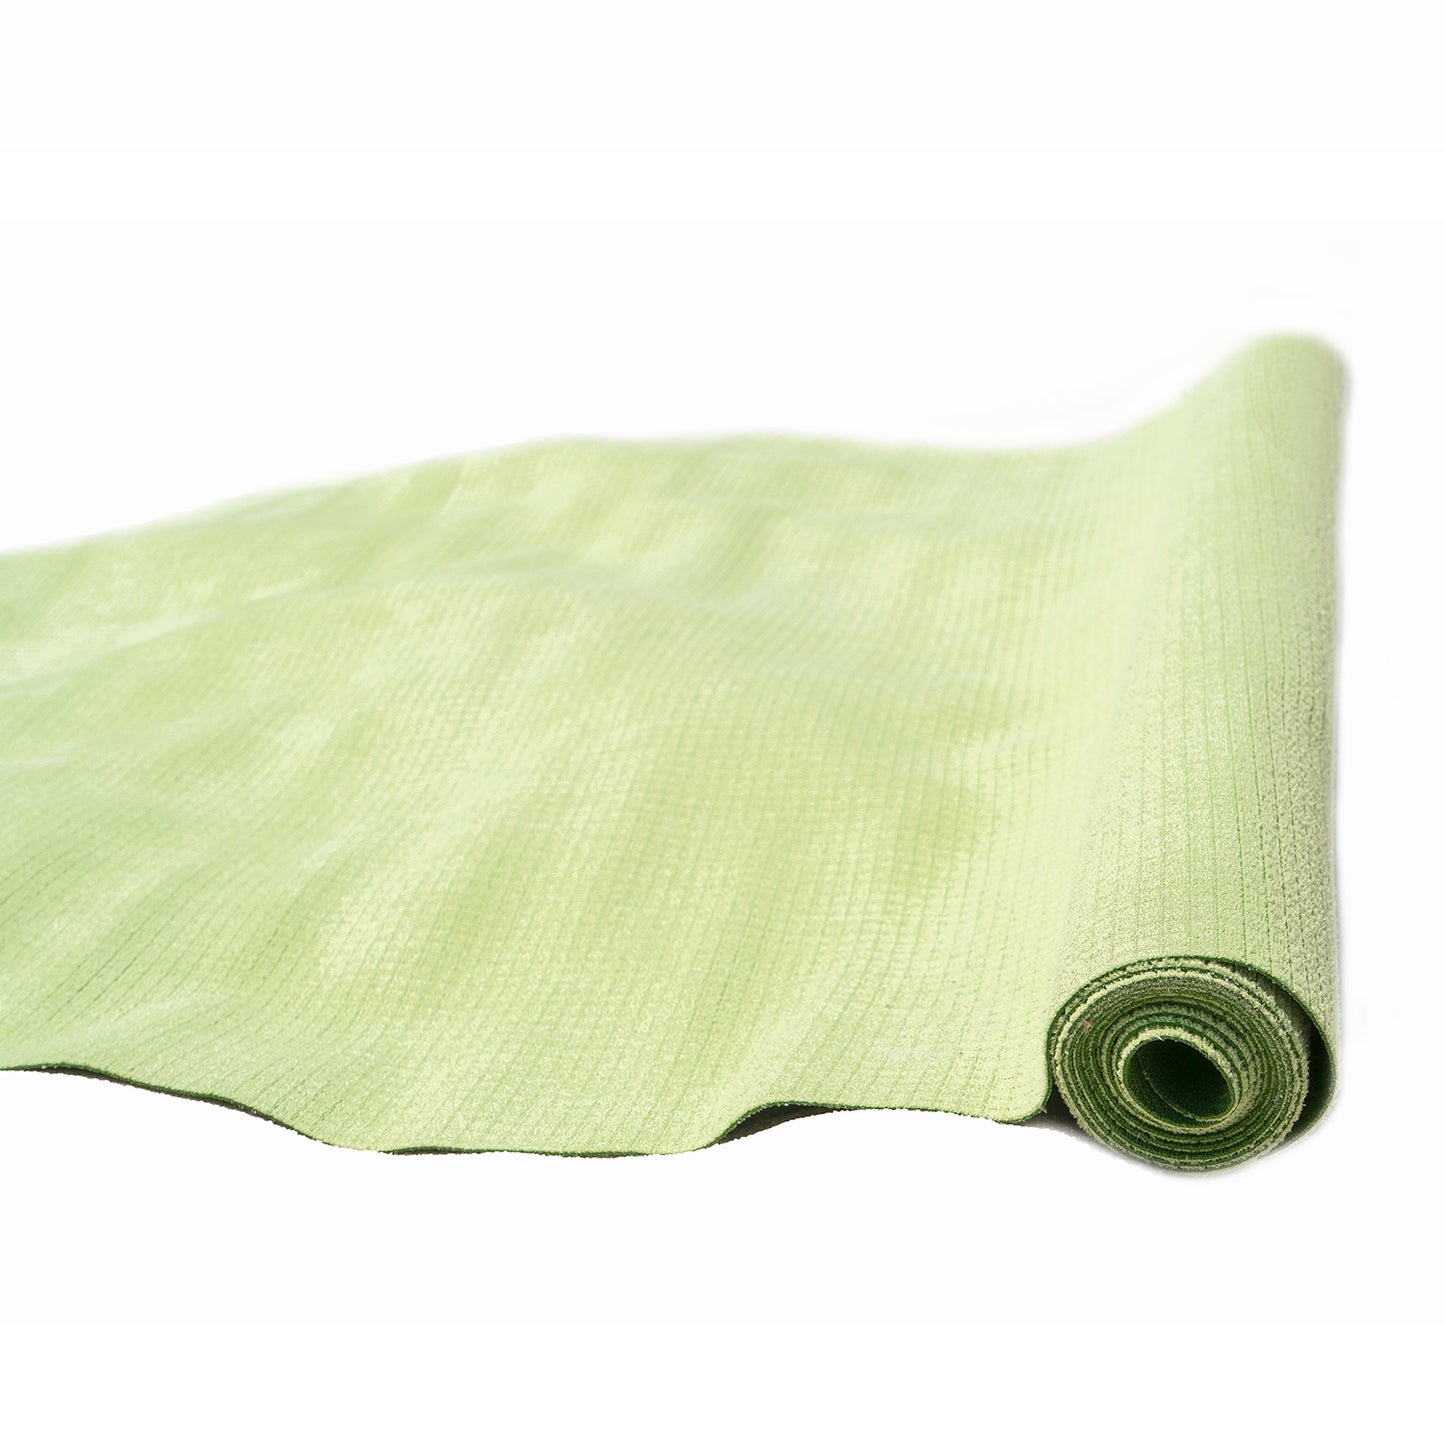 Hot Yoga Lite Mat by Yoga Accessories